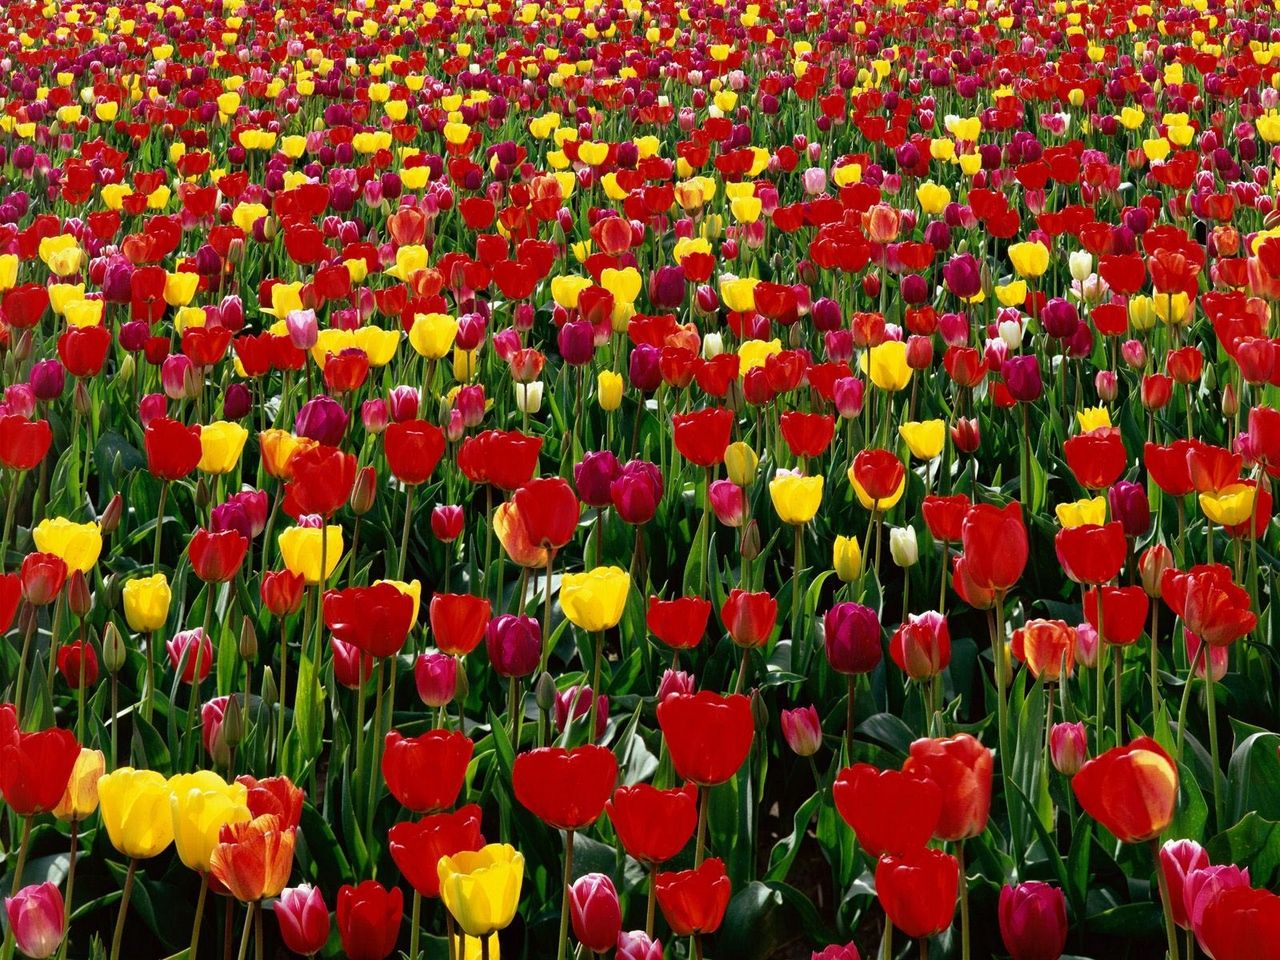 Download wallpaper 1280x960 tulips, flowers, red, yellow, bright